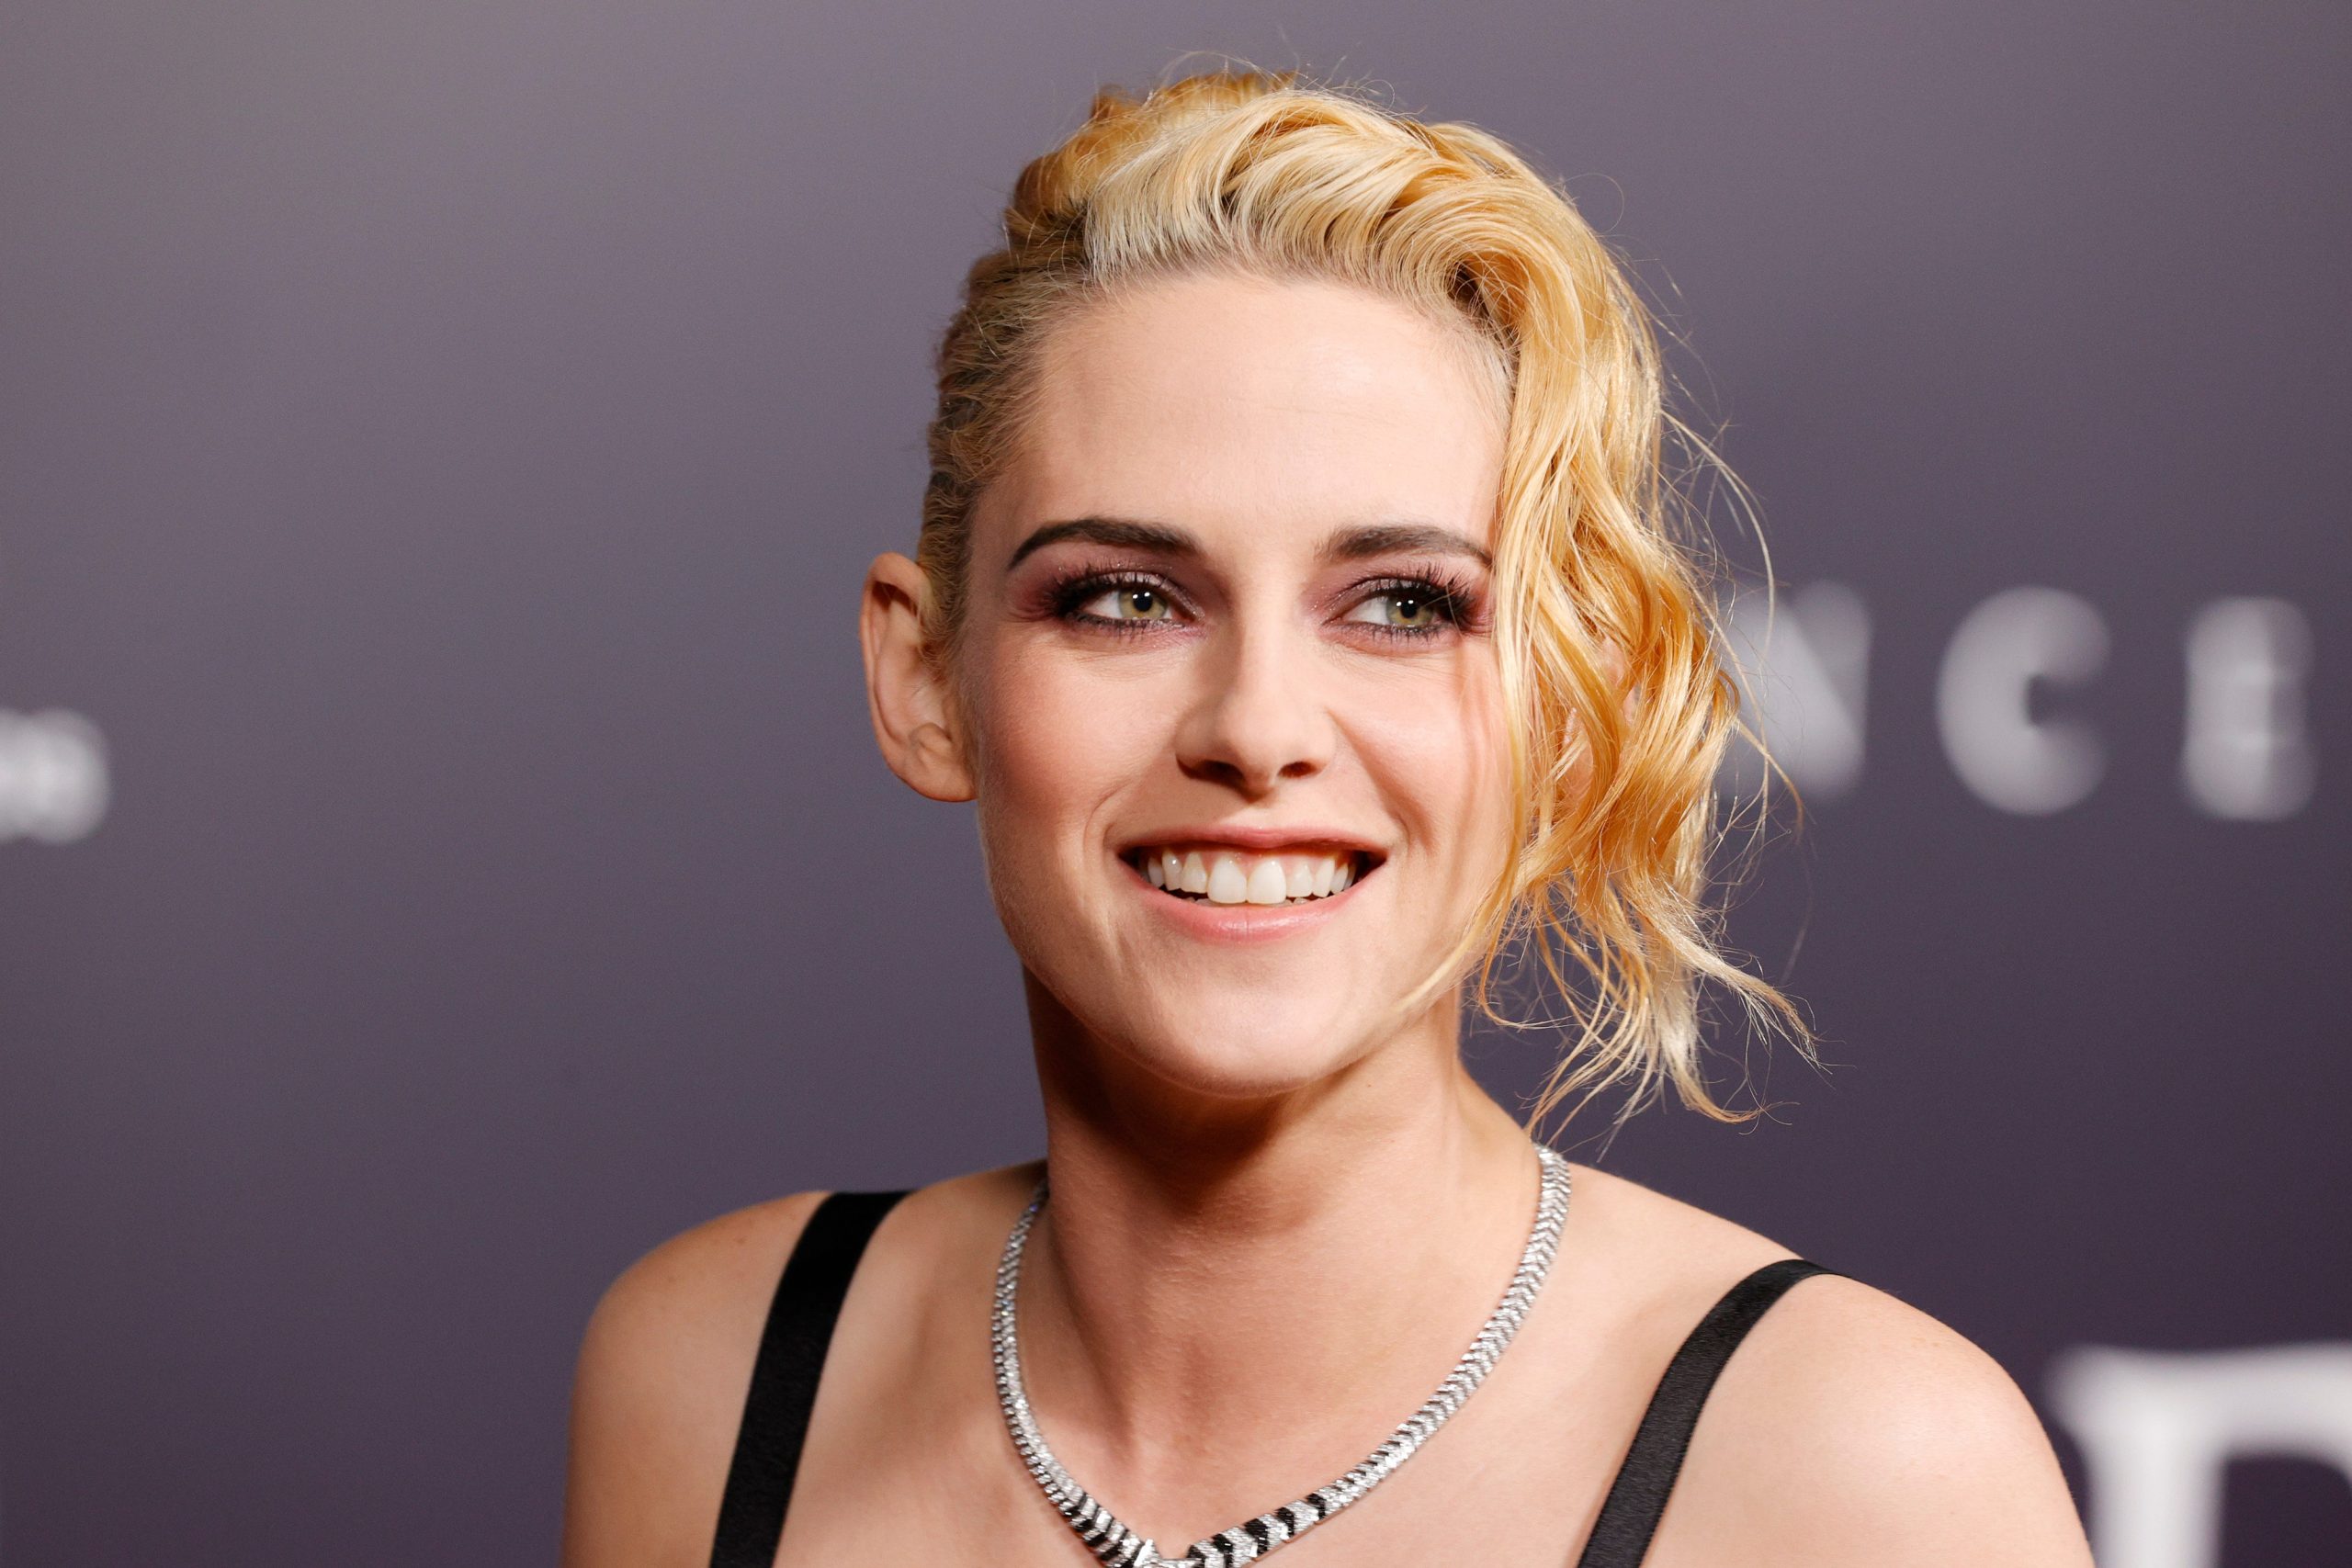 Kristen Stewart Net Worth 2022, Salary, Awards, Income, and Other Interesting Facts